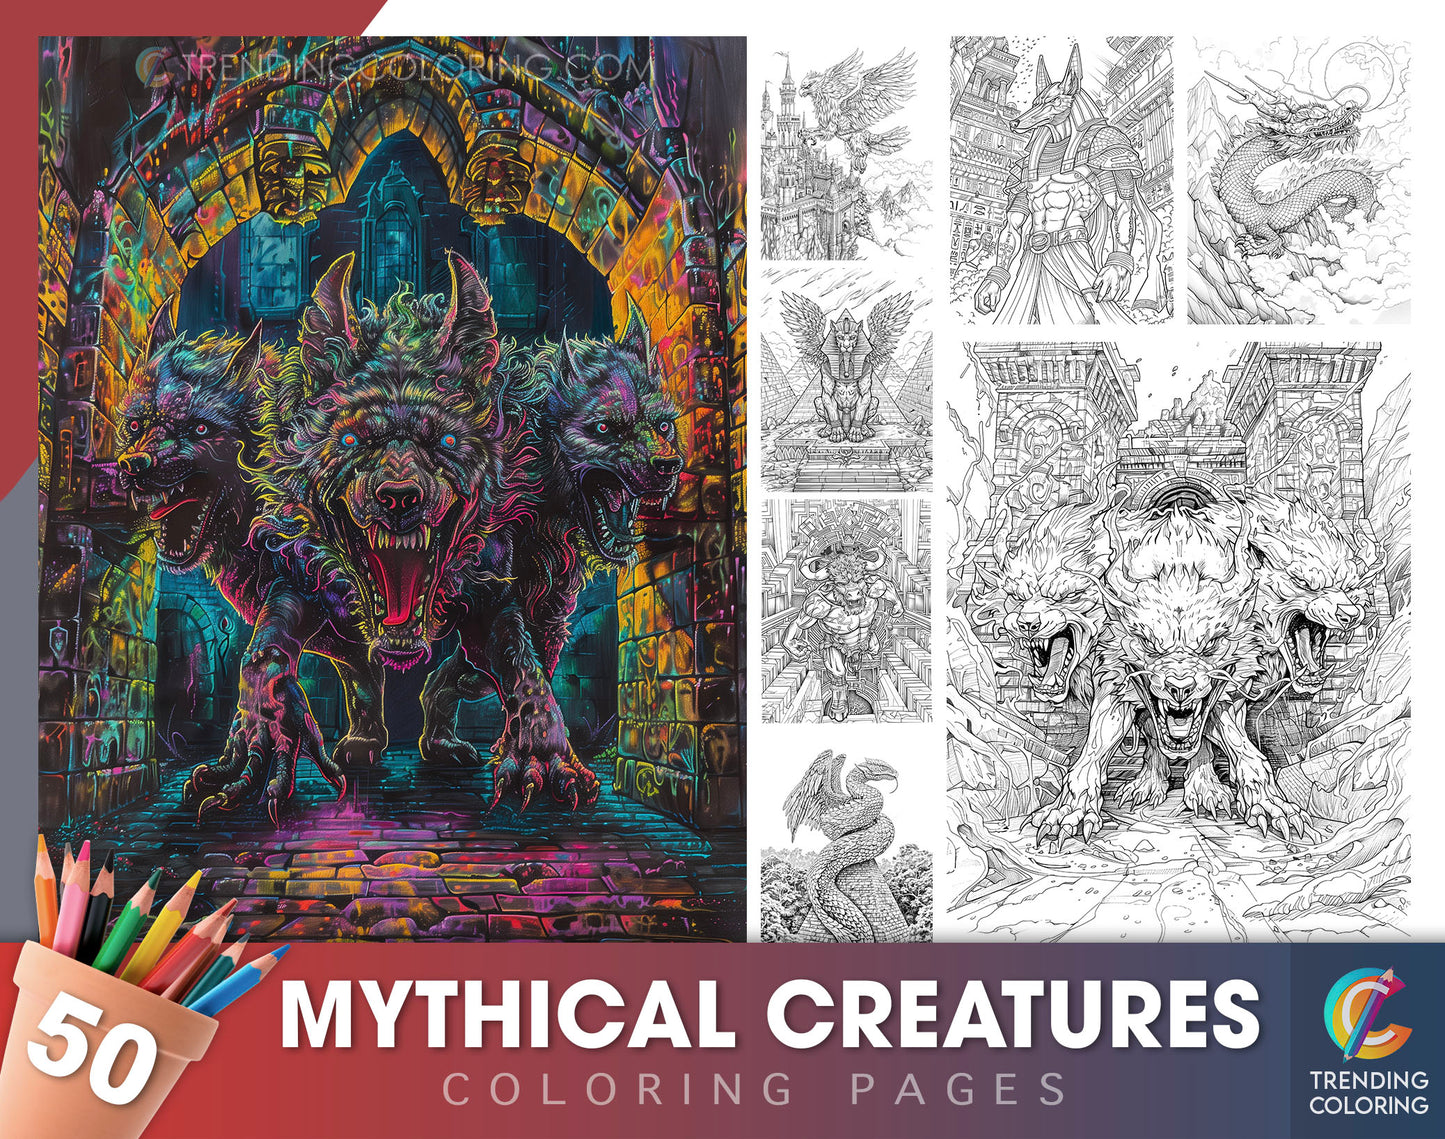 50 Mythical Creatures Coloring Pages - Instant Download - Printable PDF